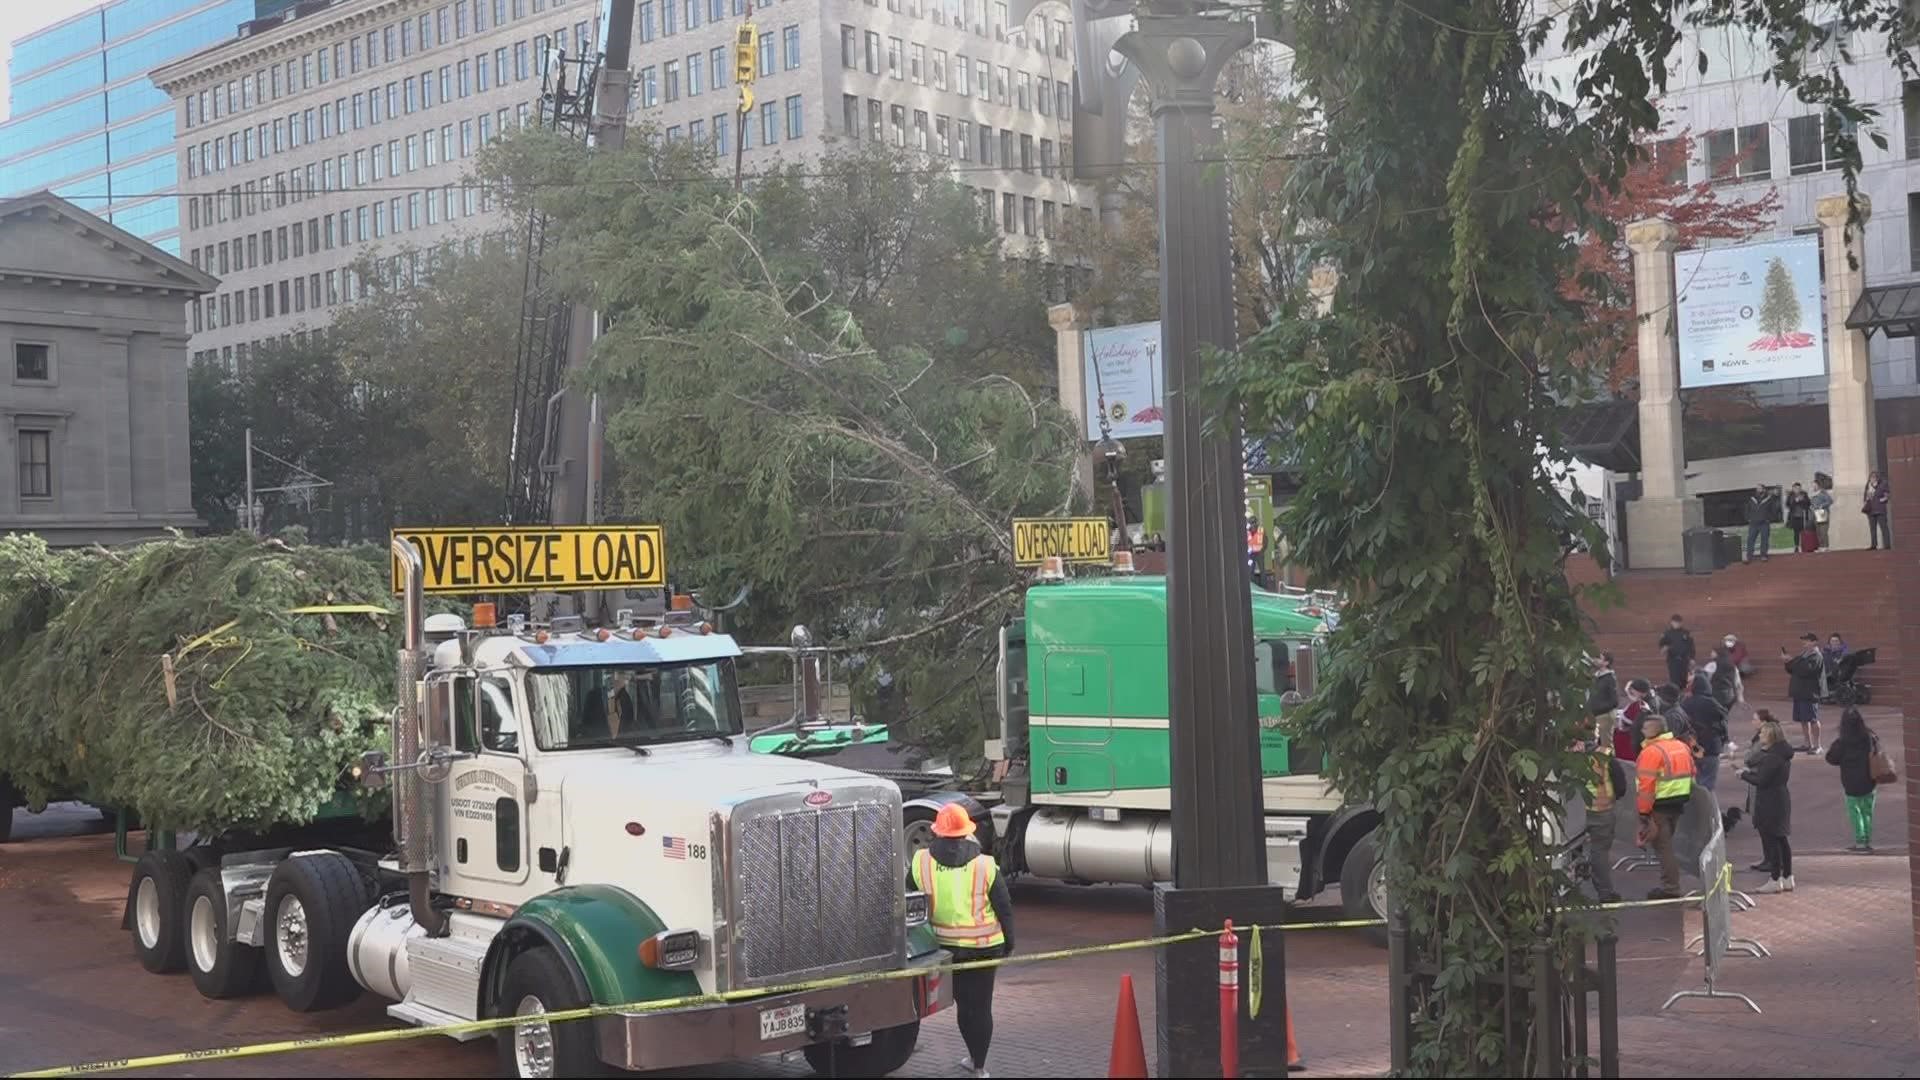 The 75-foot, 8,500-pound tree was delivered by Santa Claus Wednesday. A tree lighting will take place the day after Thanksgiving.